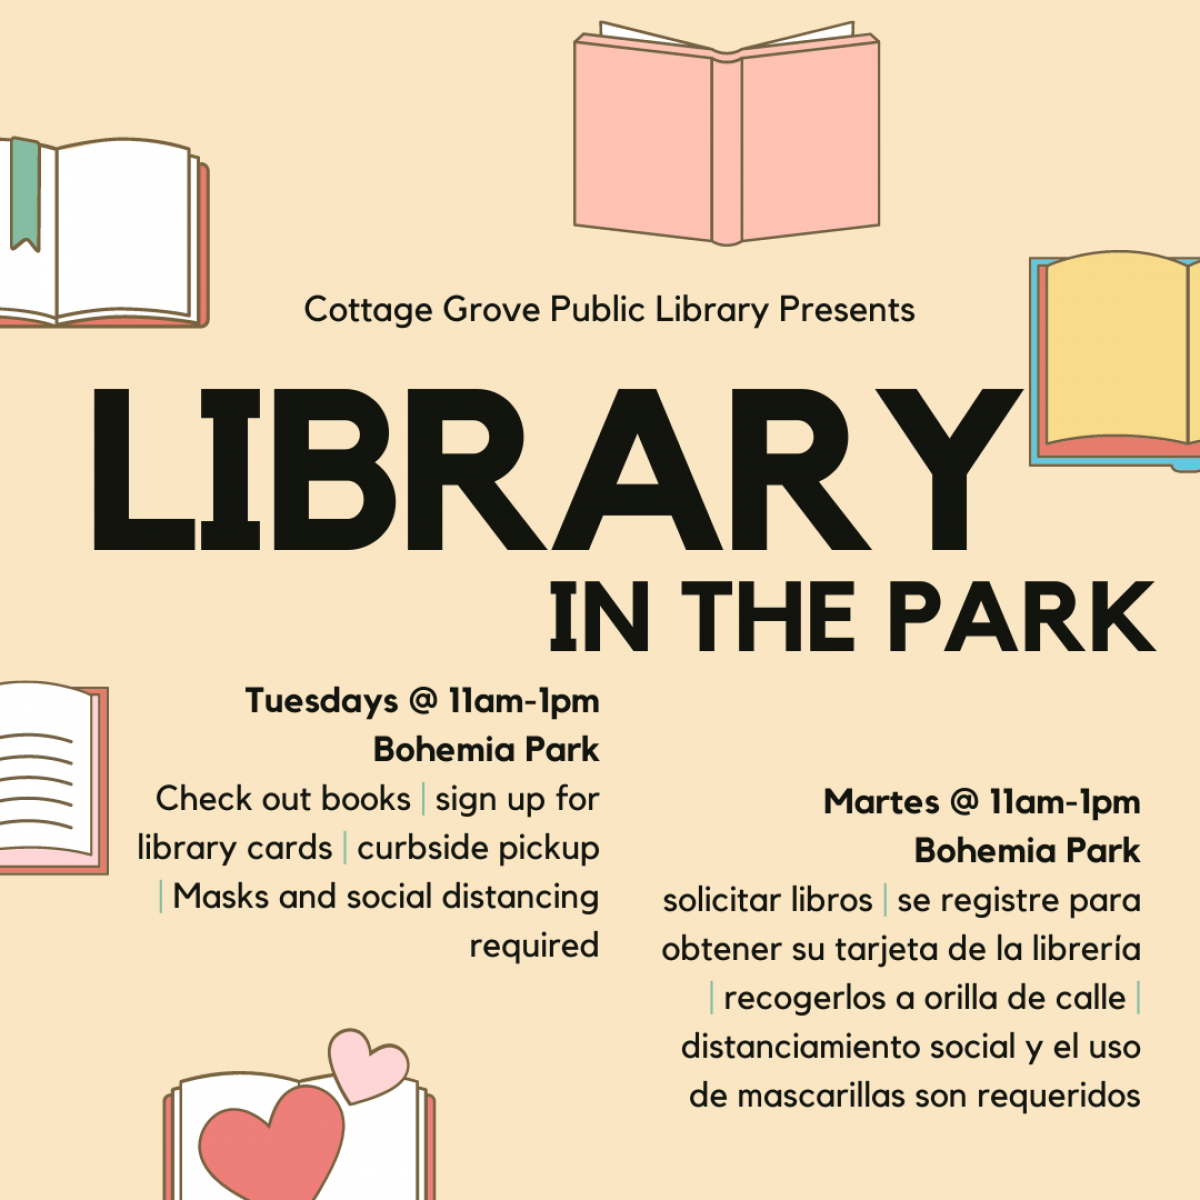 Library in the Park - Tuesdays in Bohemia Park from 11:00 am to 1:00 pm - starting April 6, 2021